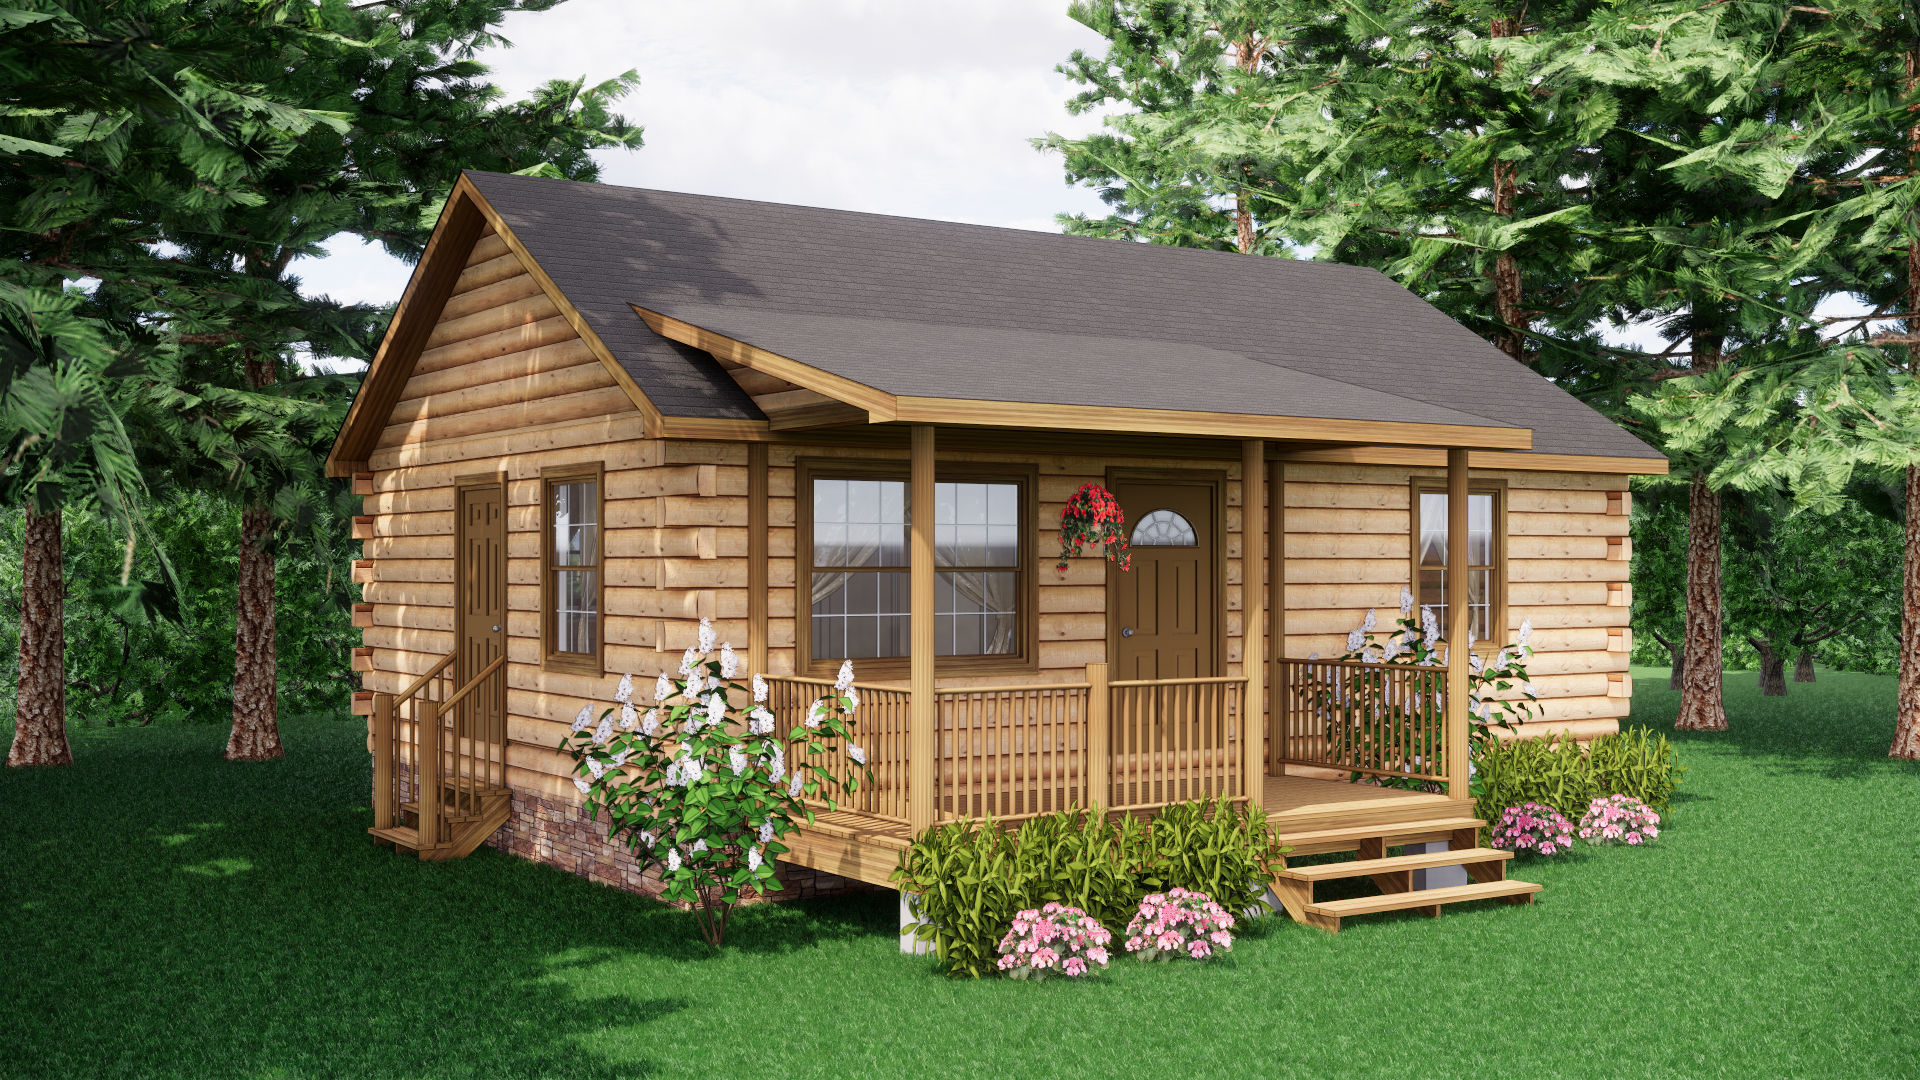 Experience Rustic Elegance with the Bear Paw Log Cabin for $61,995